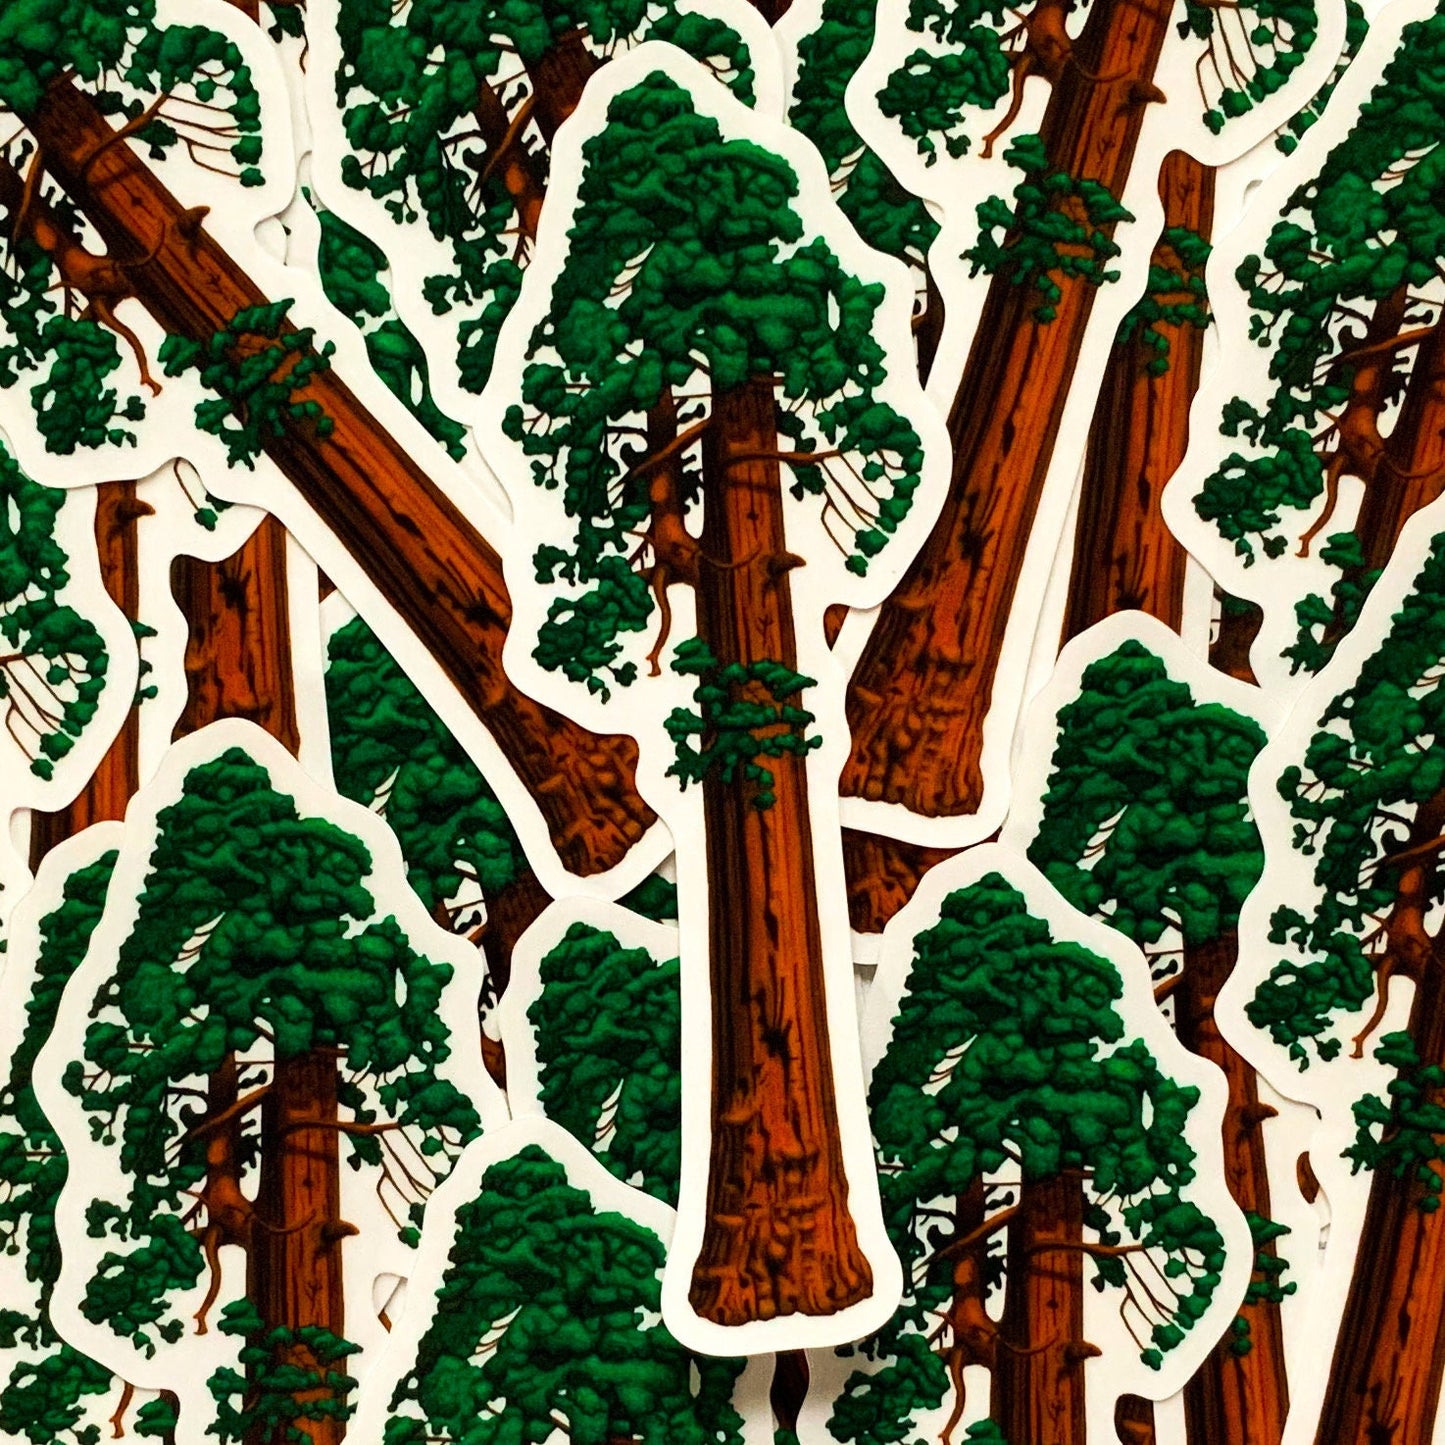 Sequoia Tree sticker- Clear Backing